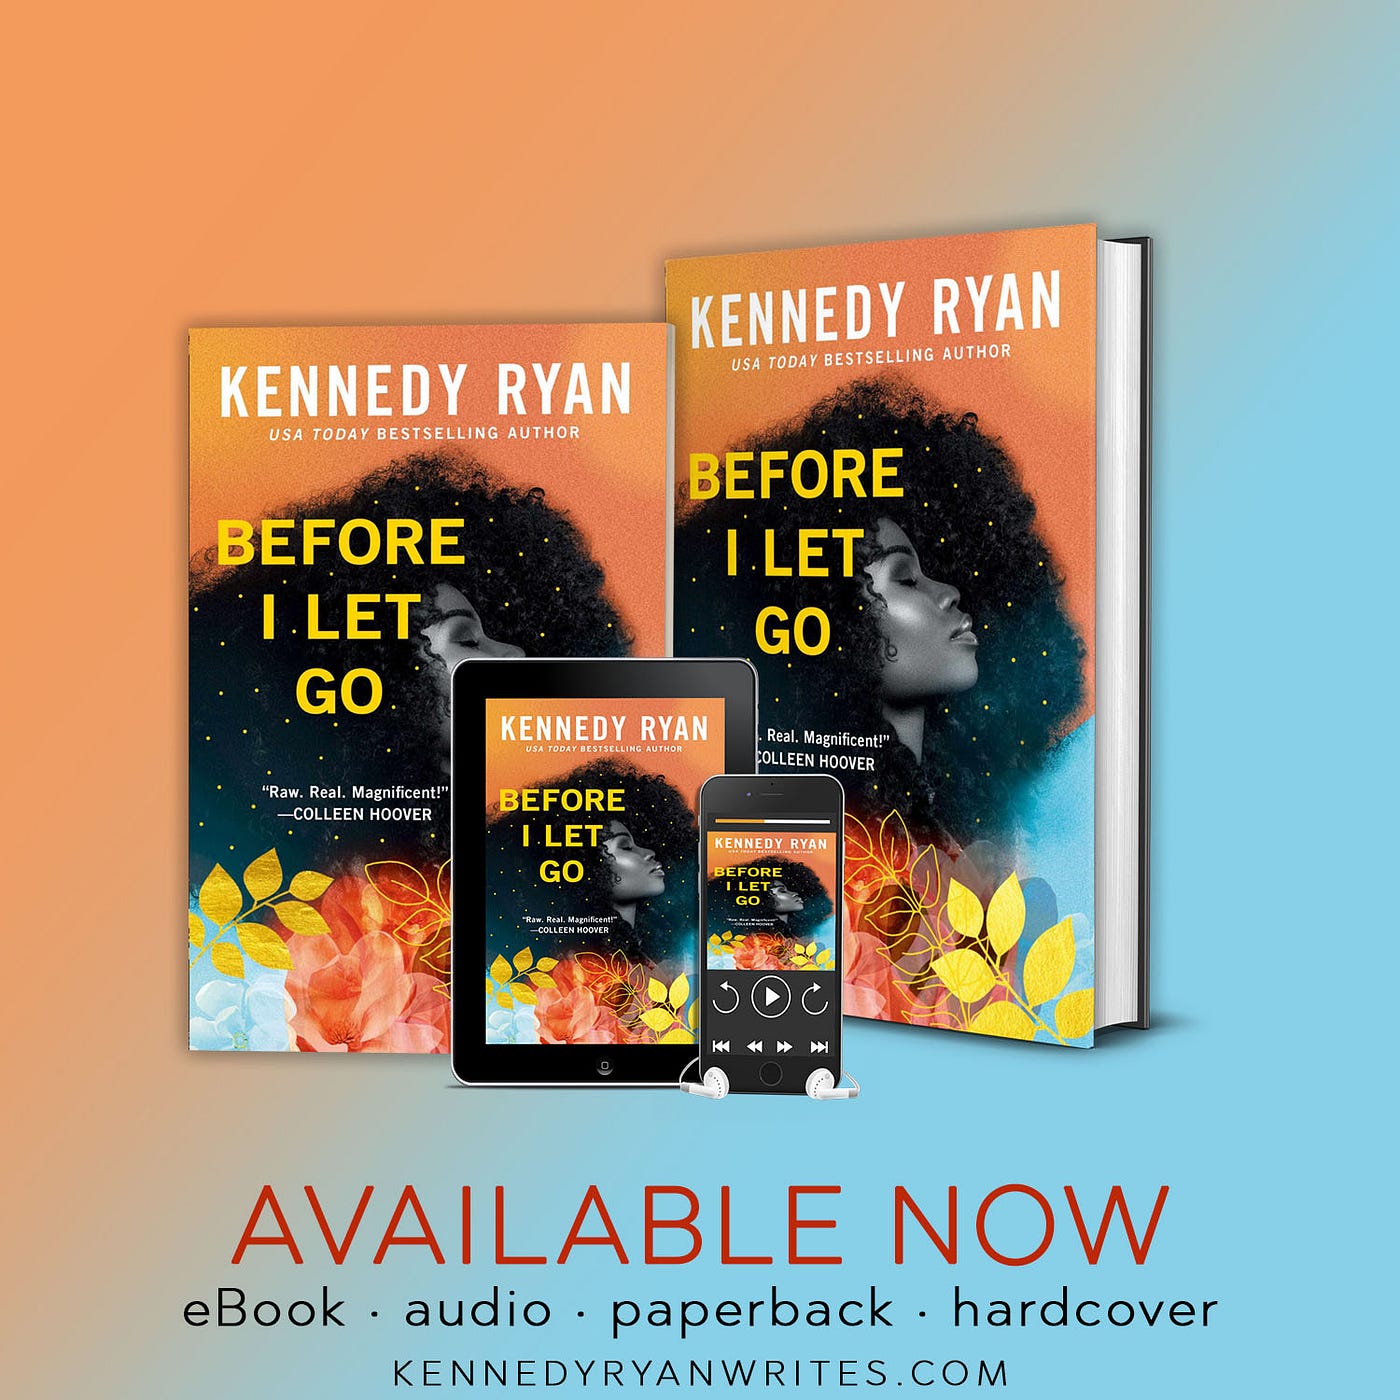 Kennedy Ryan's Before I Let Go: My Review